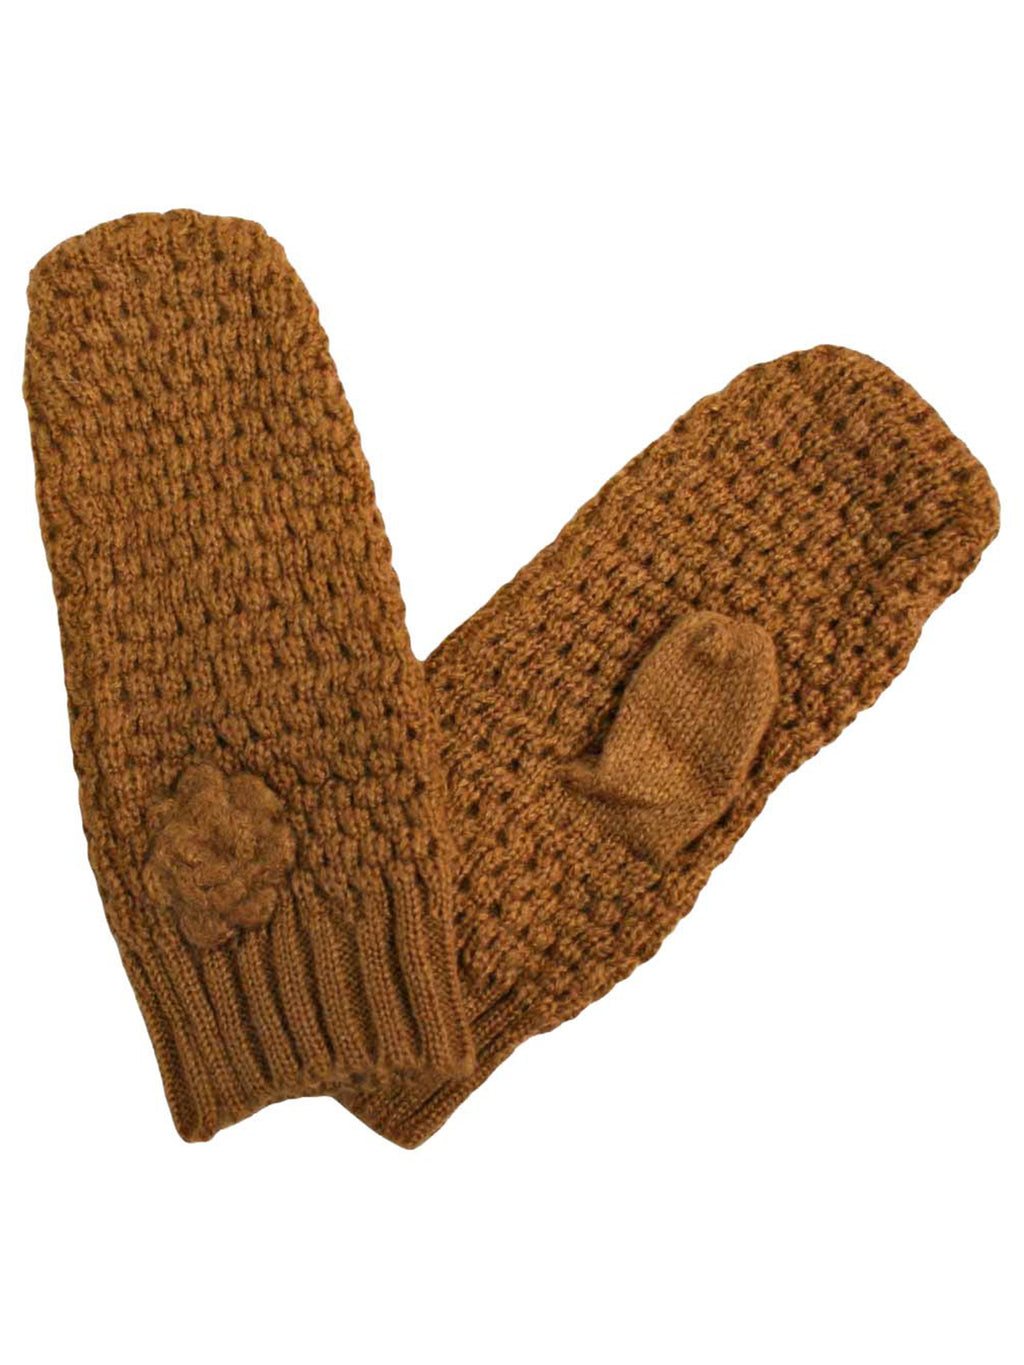 Crochet Knit Mittens With Rosette